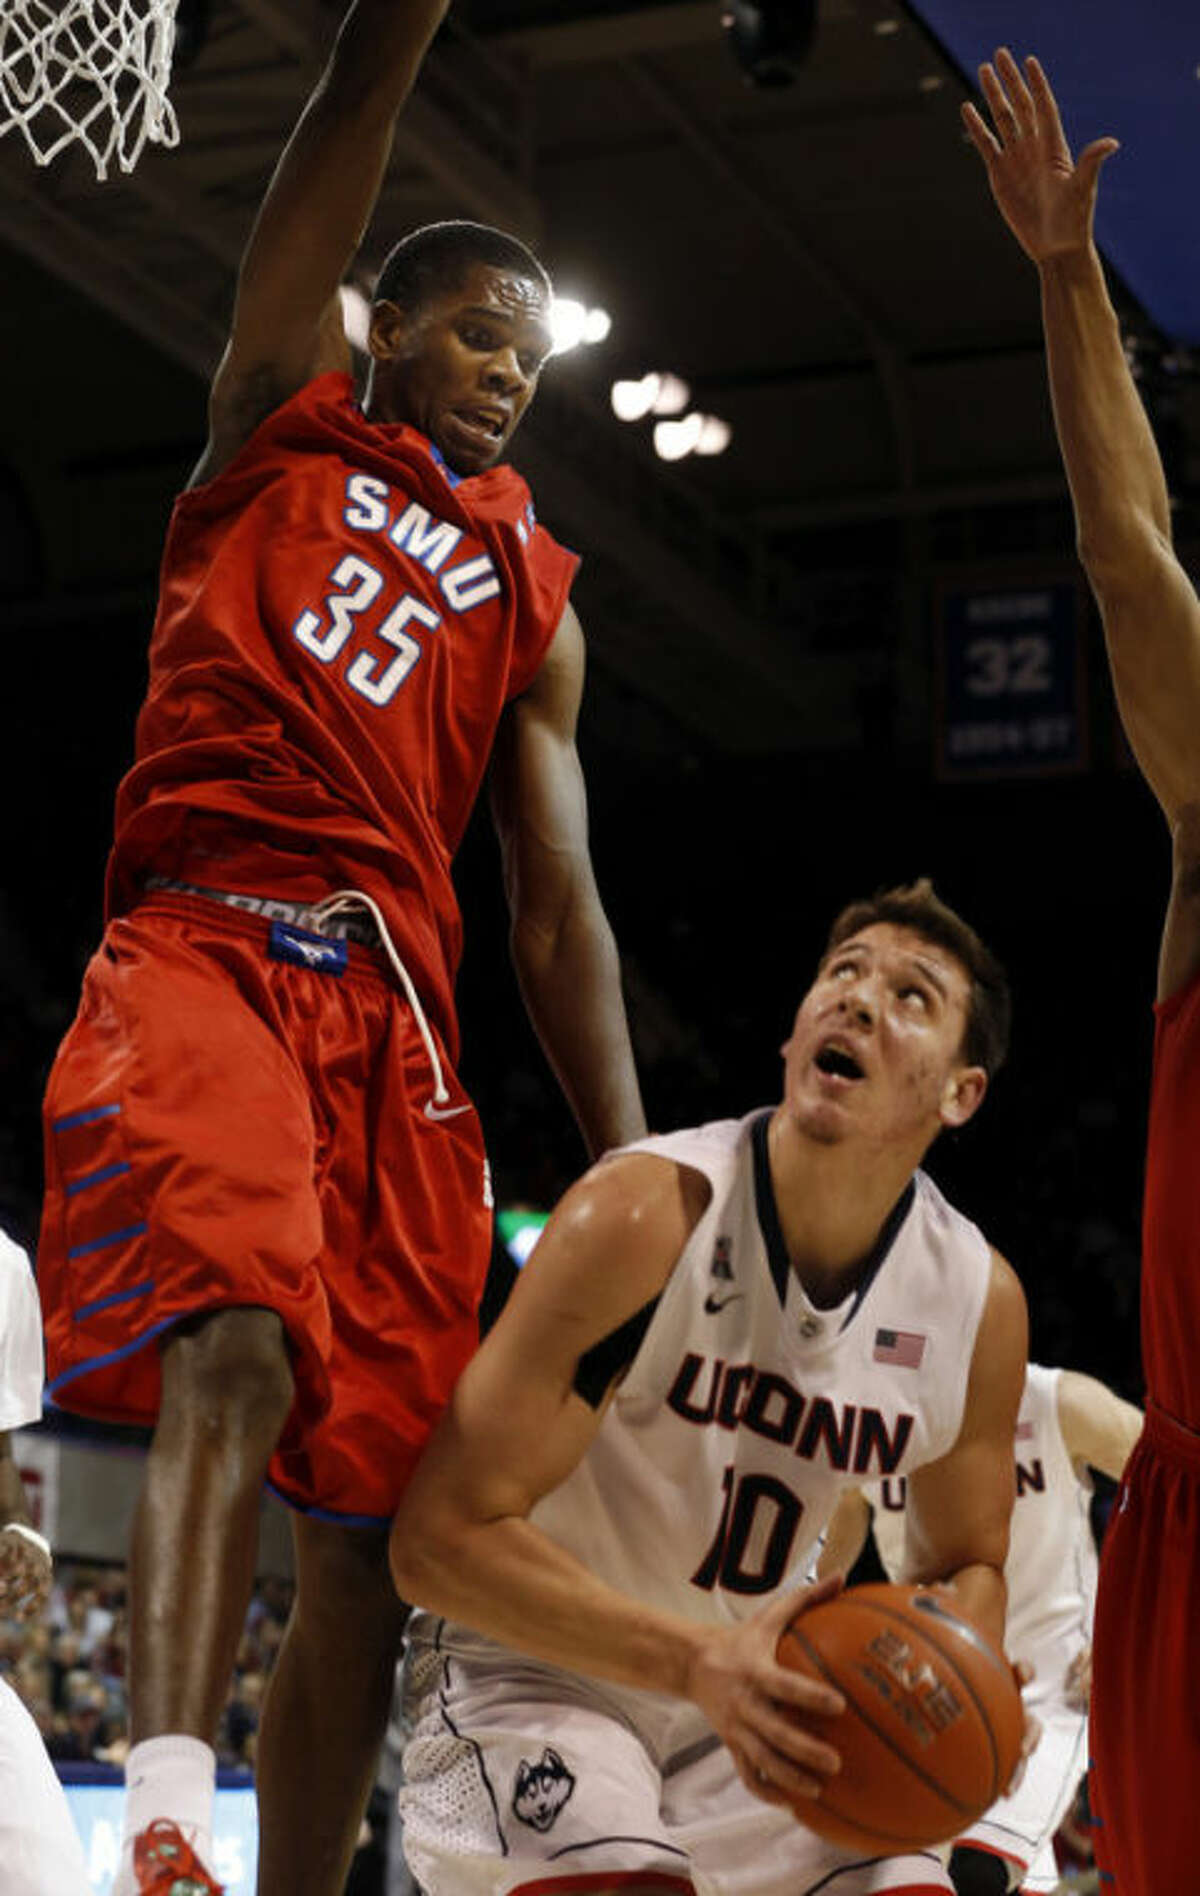 SMU center Yanick Moreira (35) leaps high to try to defend a shot by Connecticut forward Tyler Olander (10) during the first half of a NCAA basketball game on Saturday, Jan. 4, 2014, in Dallas.  (AP Photo/John F. Rhodes)